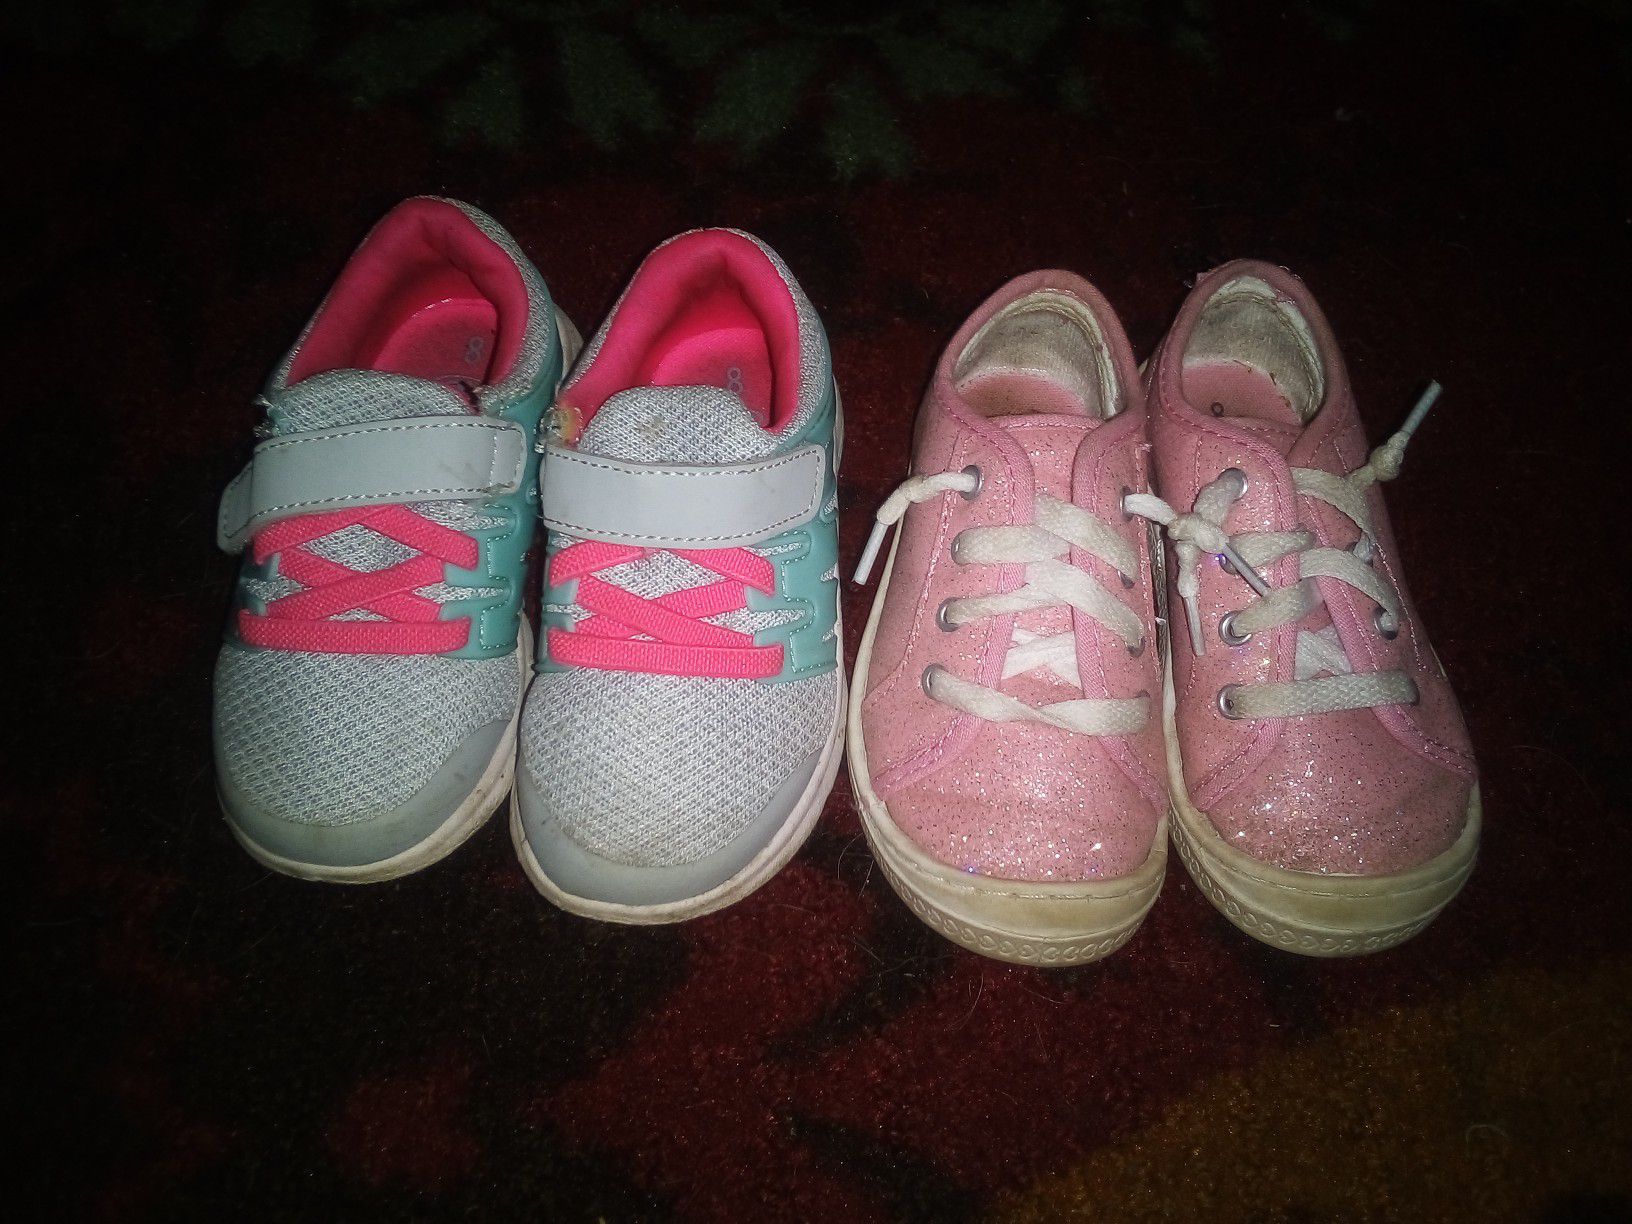 Girl's Toddler Size 8 Shoes